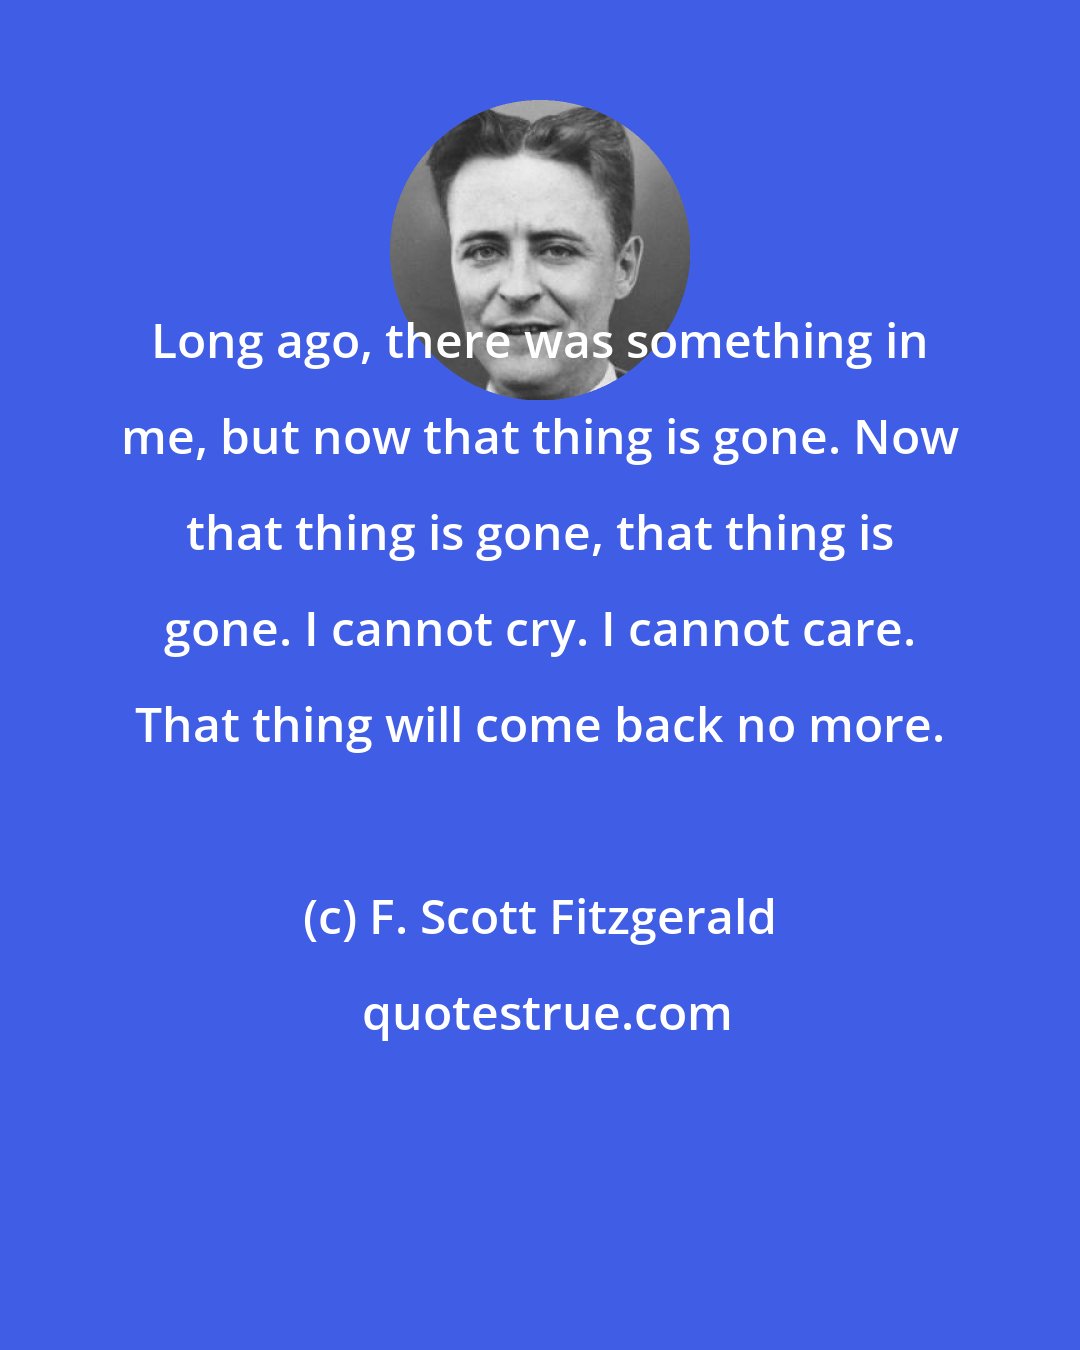 F. Scott Fitzgerald: Long ago, there was something in me, but now that thing is gone. Now that thing is gone, that thing is gone. I cannot cry. I cannot care. That thing will come back no more.